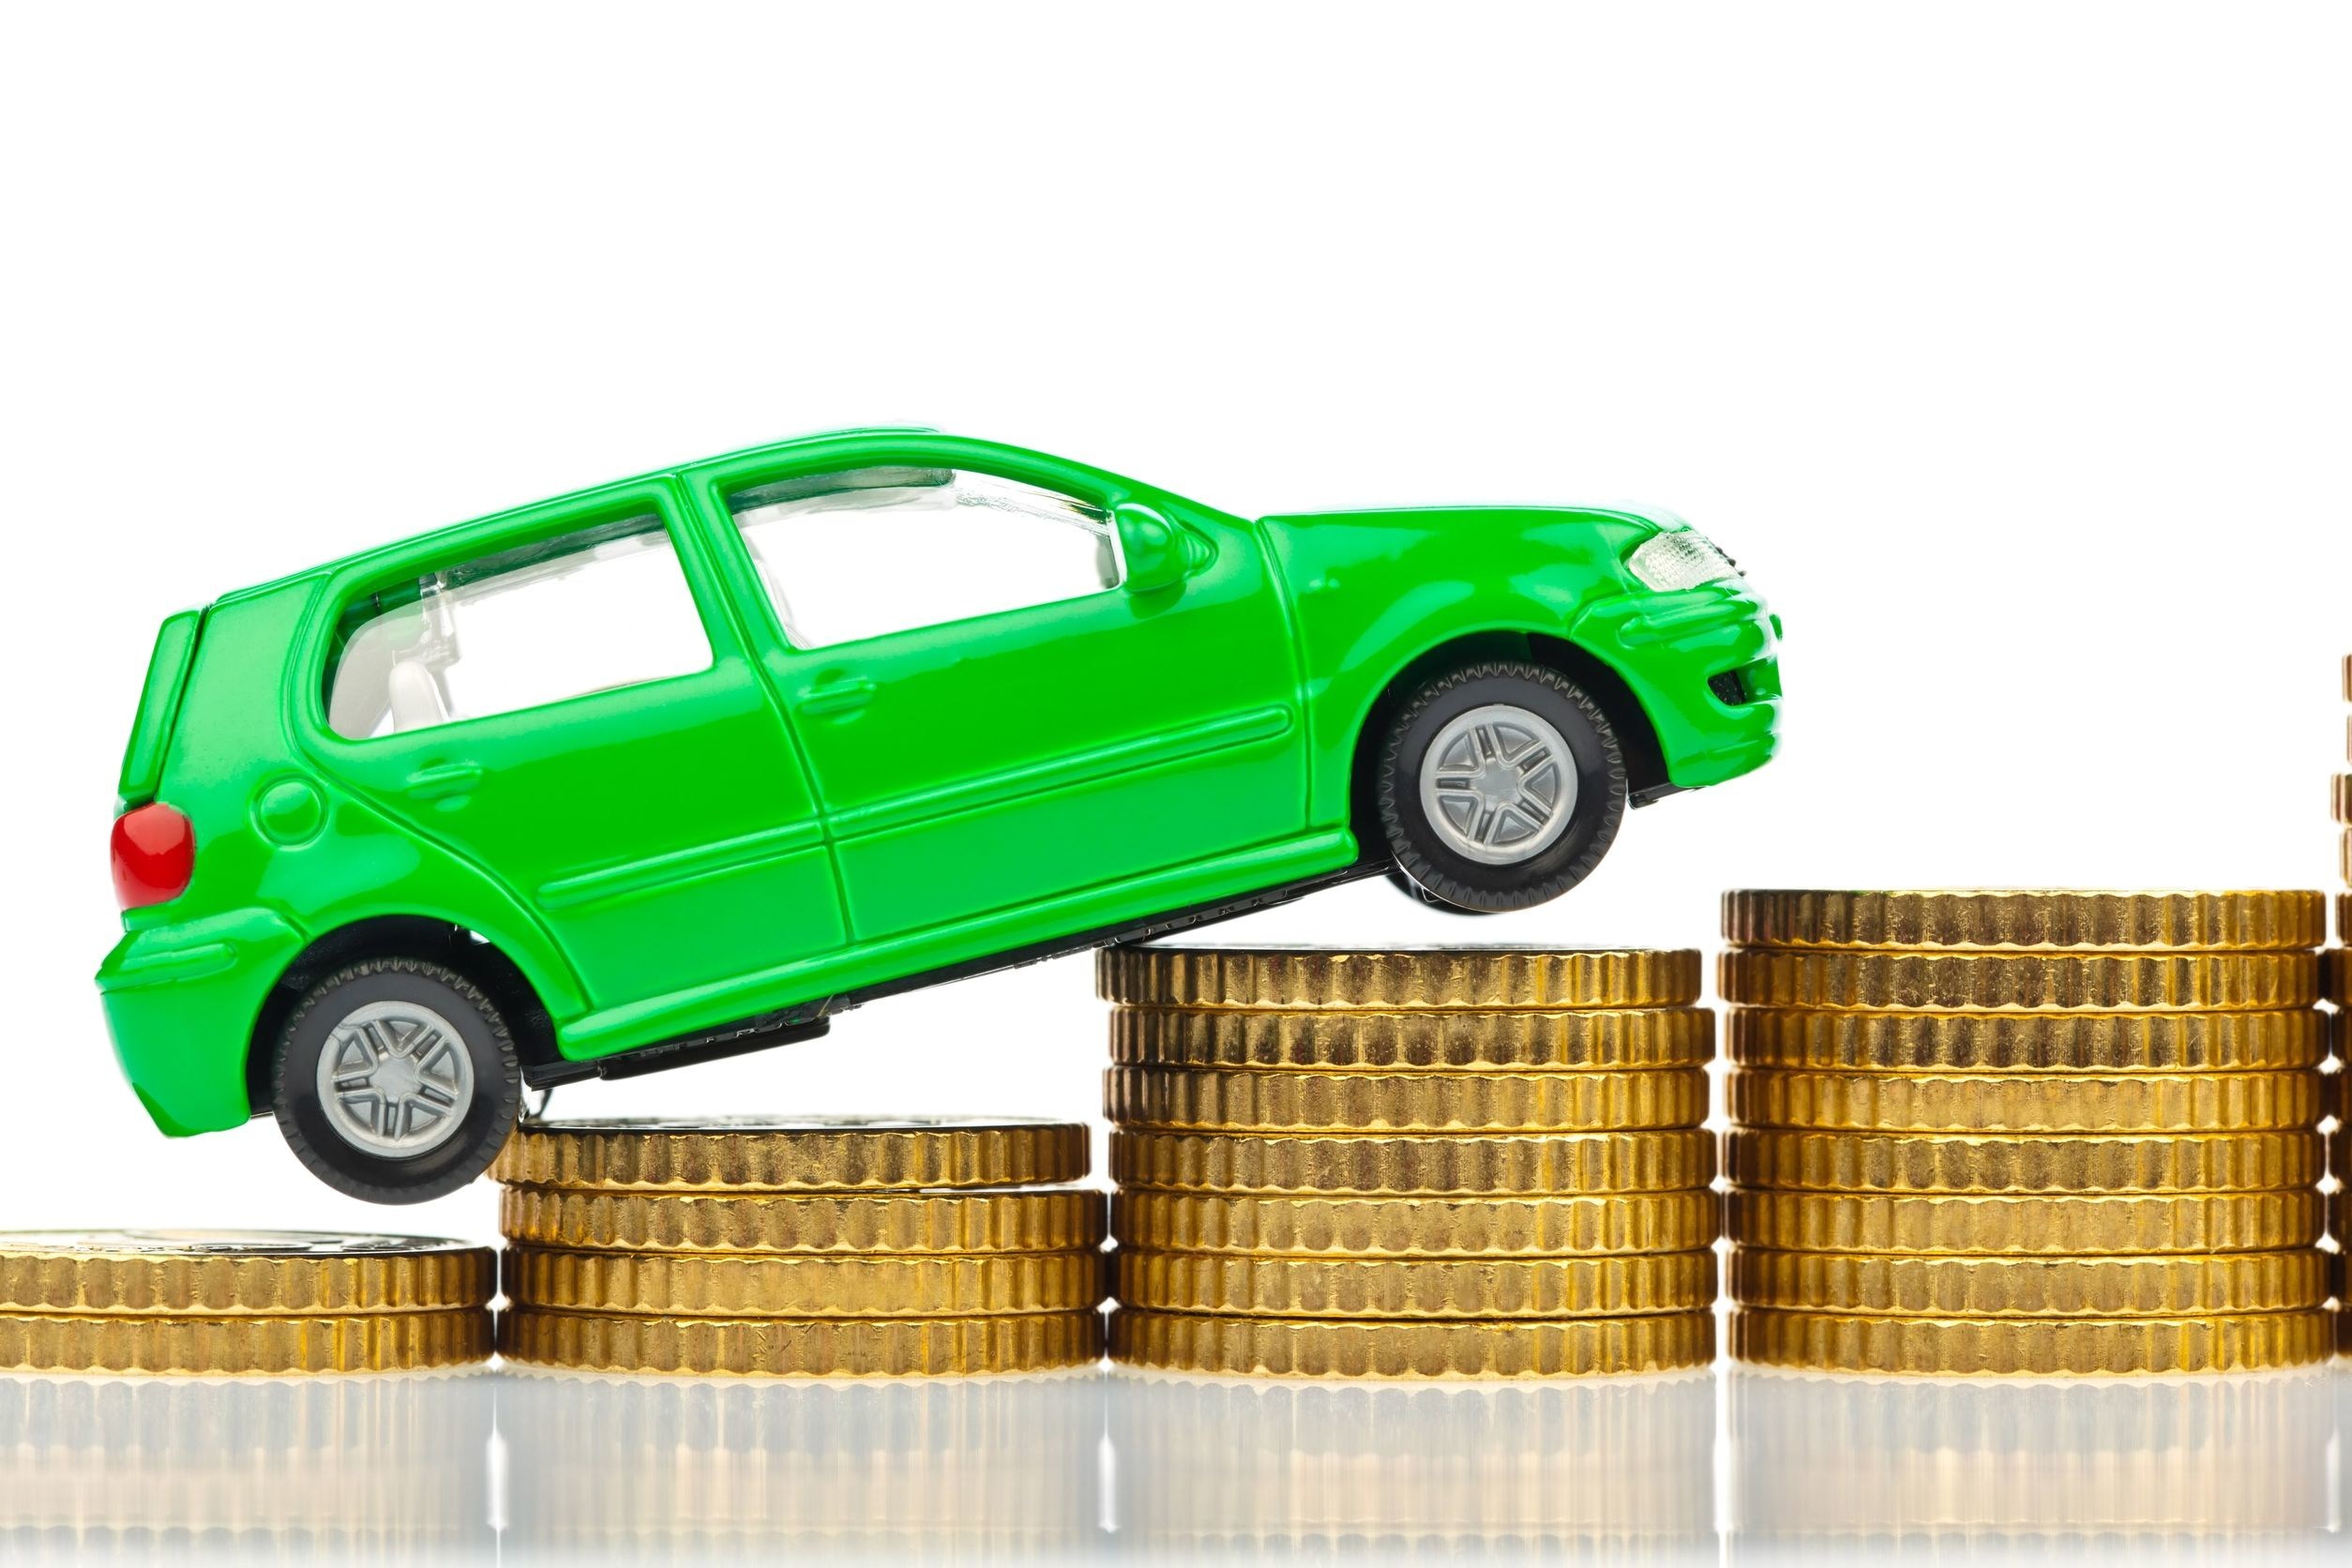 Online car insurance quotes are great for comparing prices.